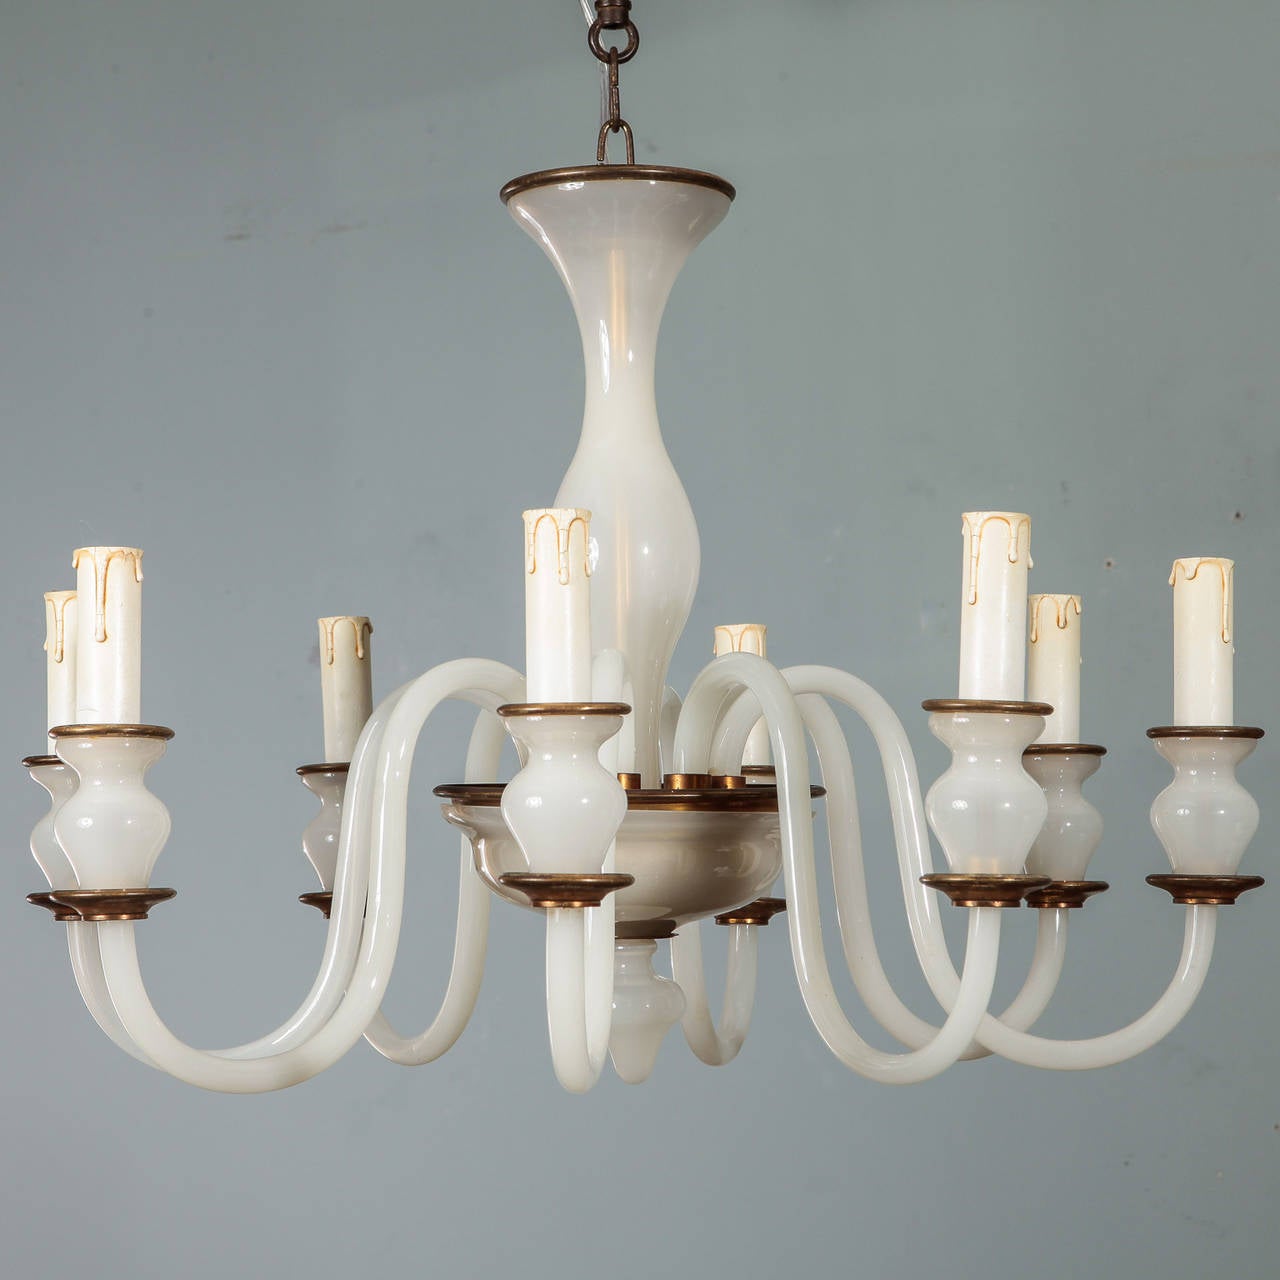 Circa 1960s Murano chandelier in white opaline hand blown glass with brass trim, eight candle arms. New wiring for US electrical standards.